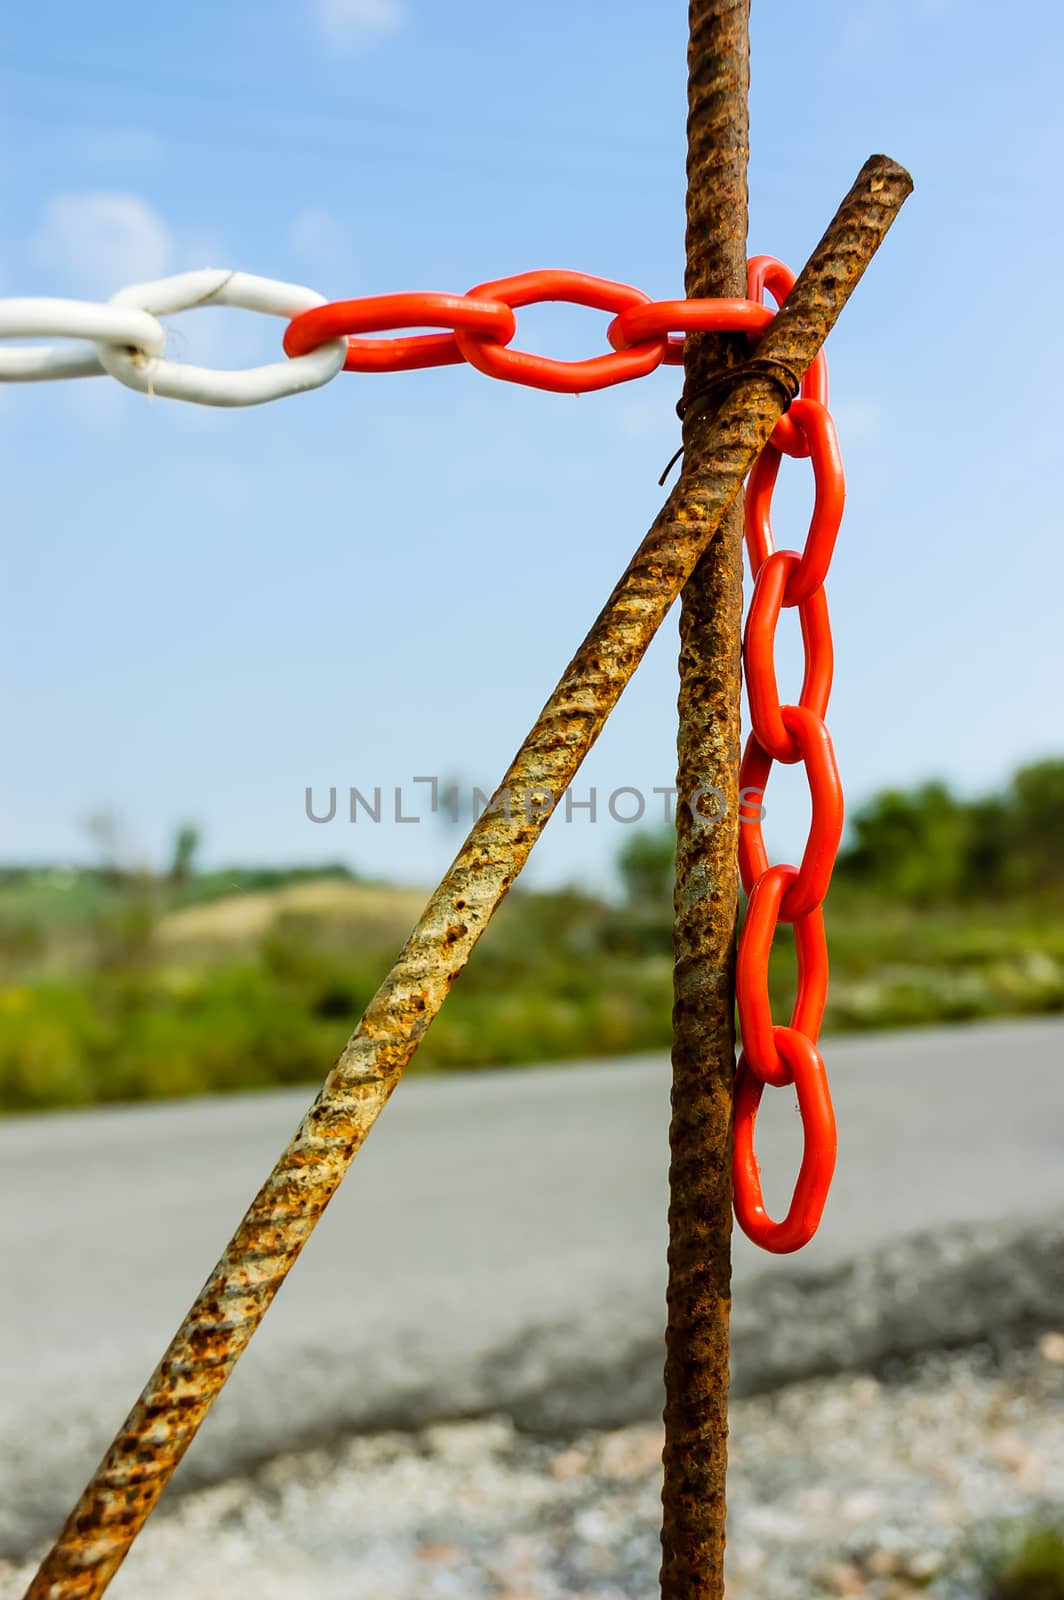 Red and white plastic chain with big links to close the entrance of a site close to the road in the country